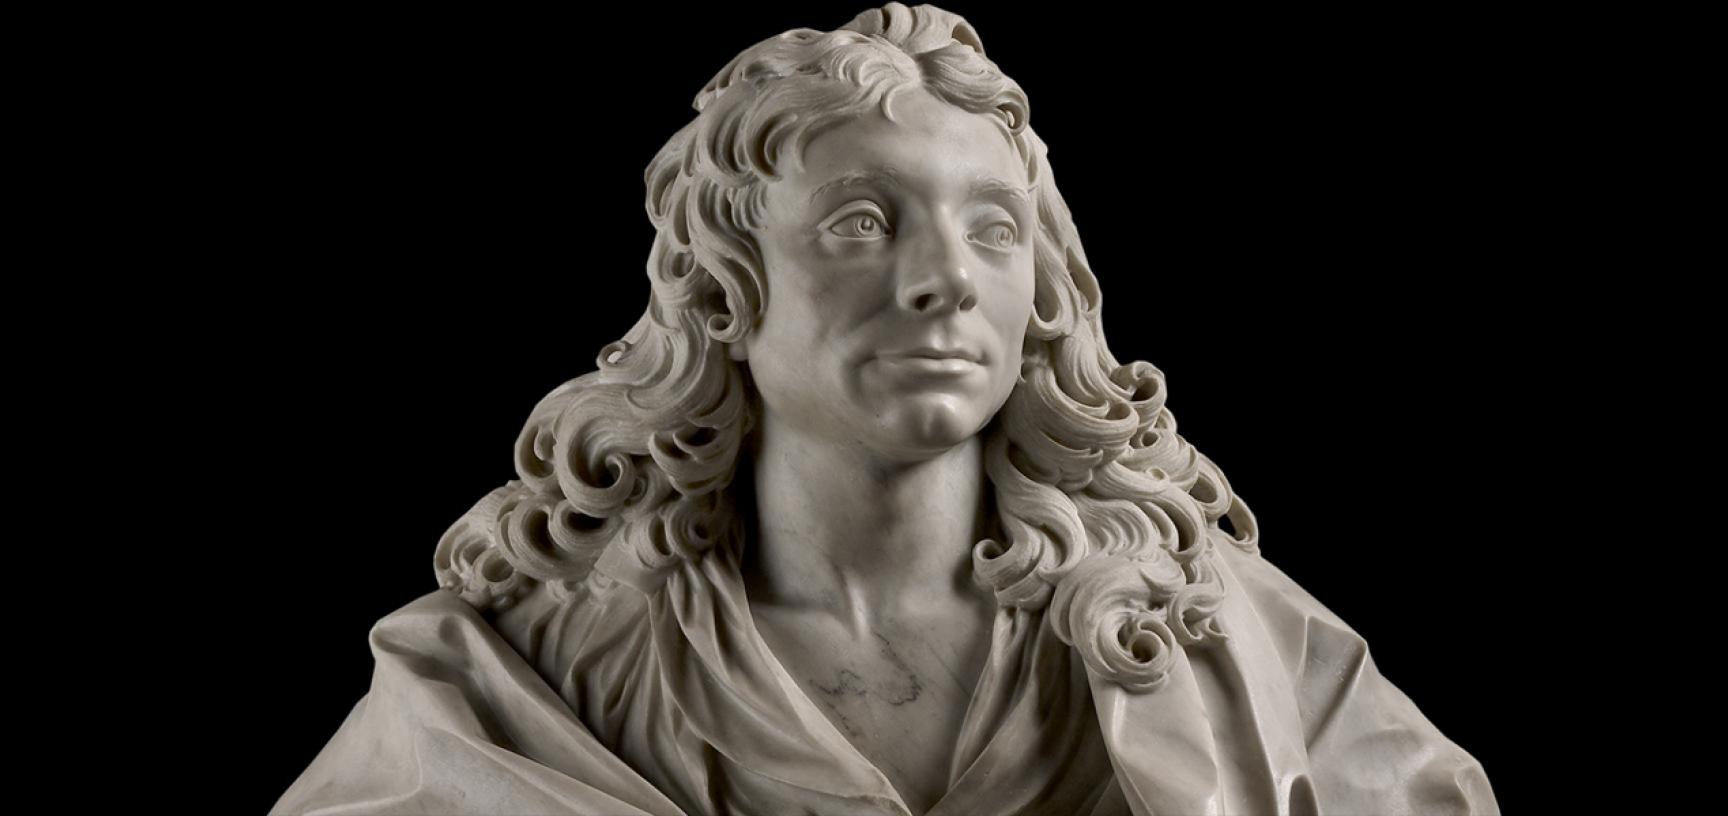 Bust of Sir Christopher Wren by Edward Pierce (c. 1630-1695) – The Baroque Art Gallery at the Ashmolean Museum